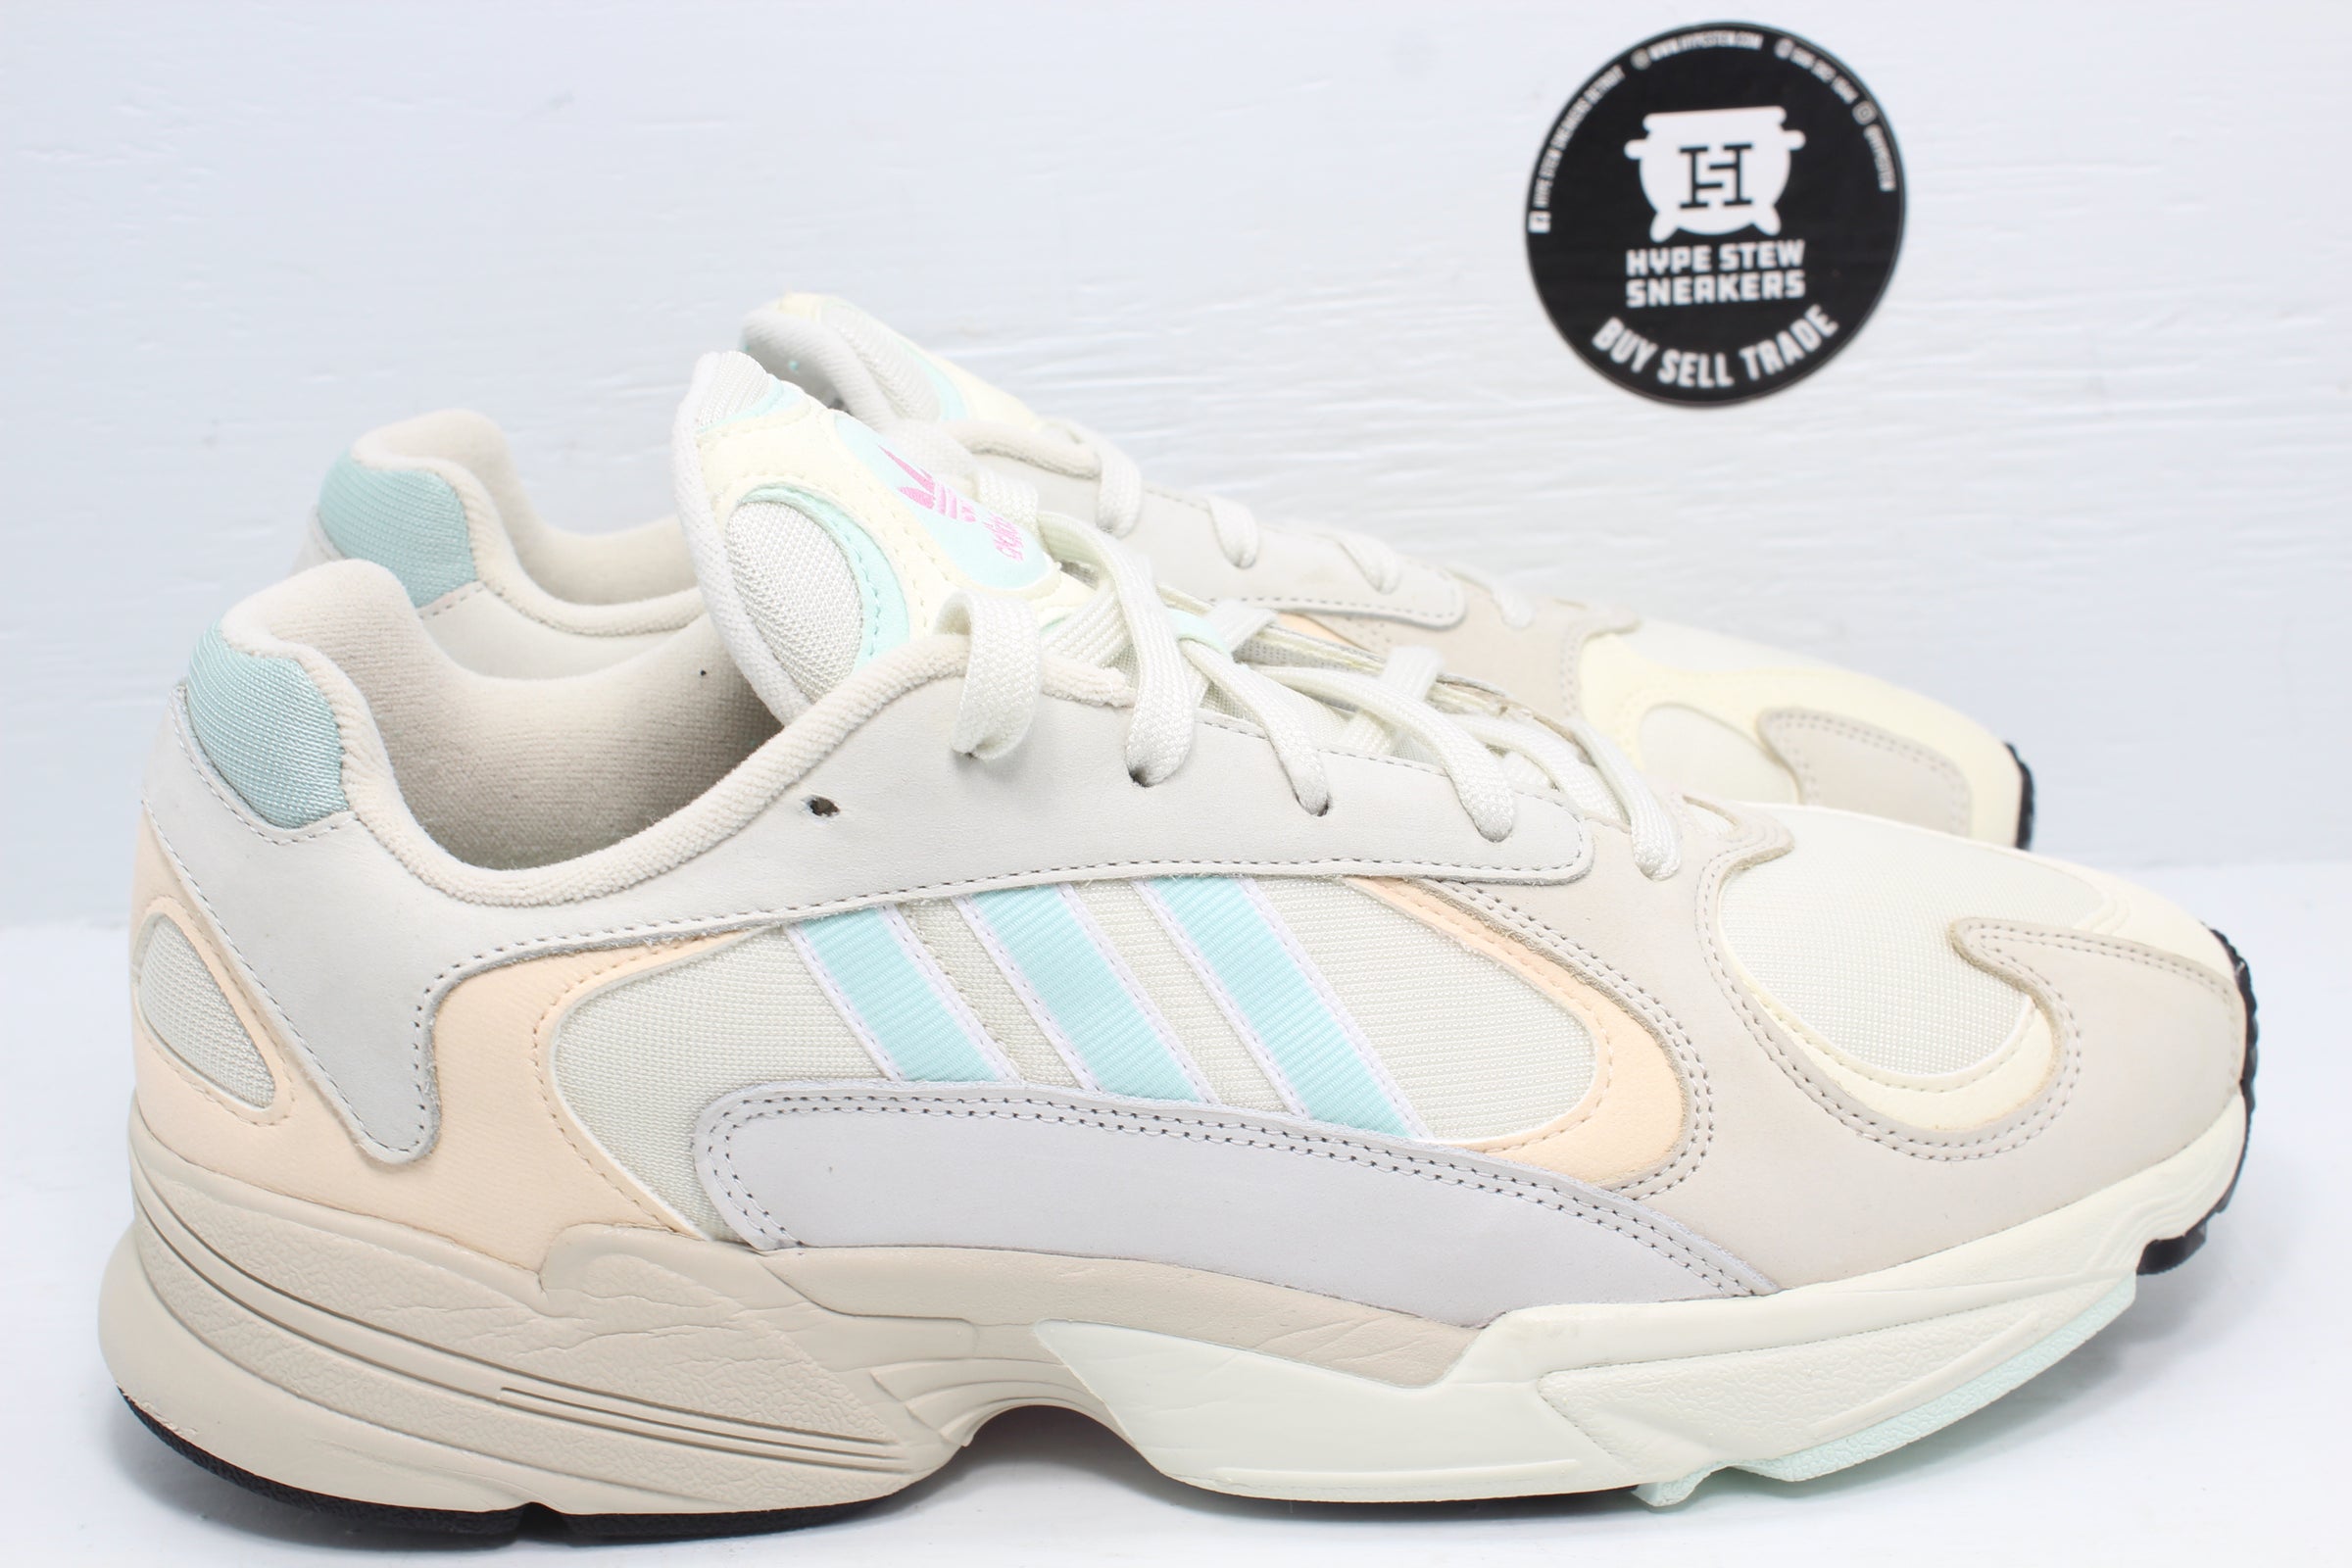 Adidas Off White Ice Mint | Hype Stew Sneakers Detroit